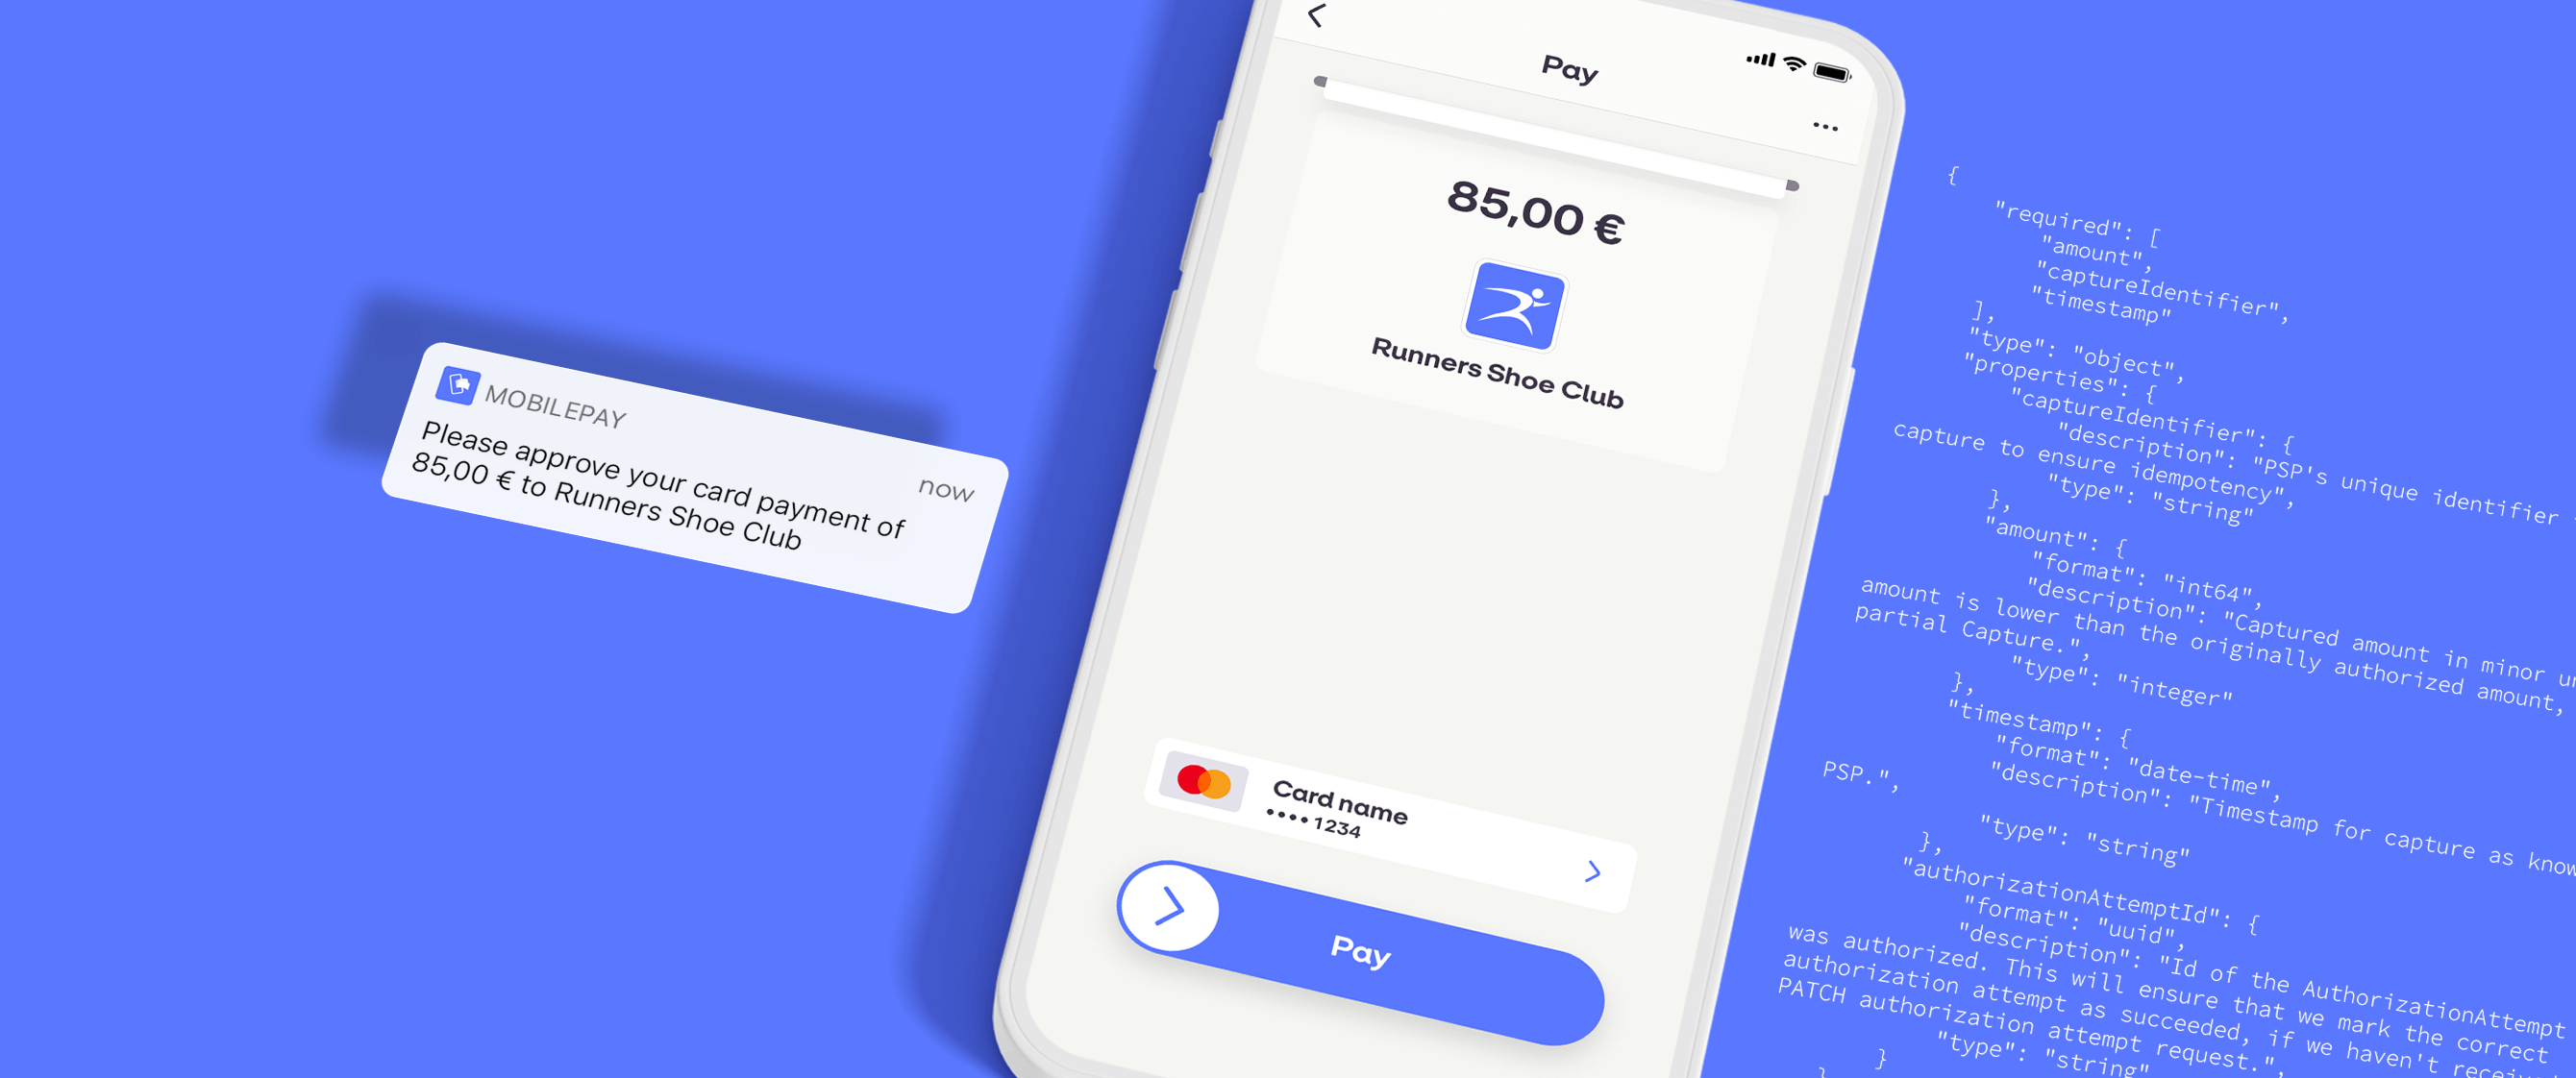 Release the potential of ecommerce with MobilePay